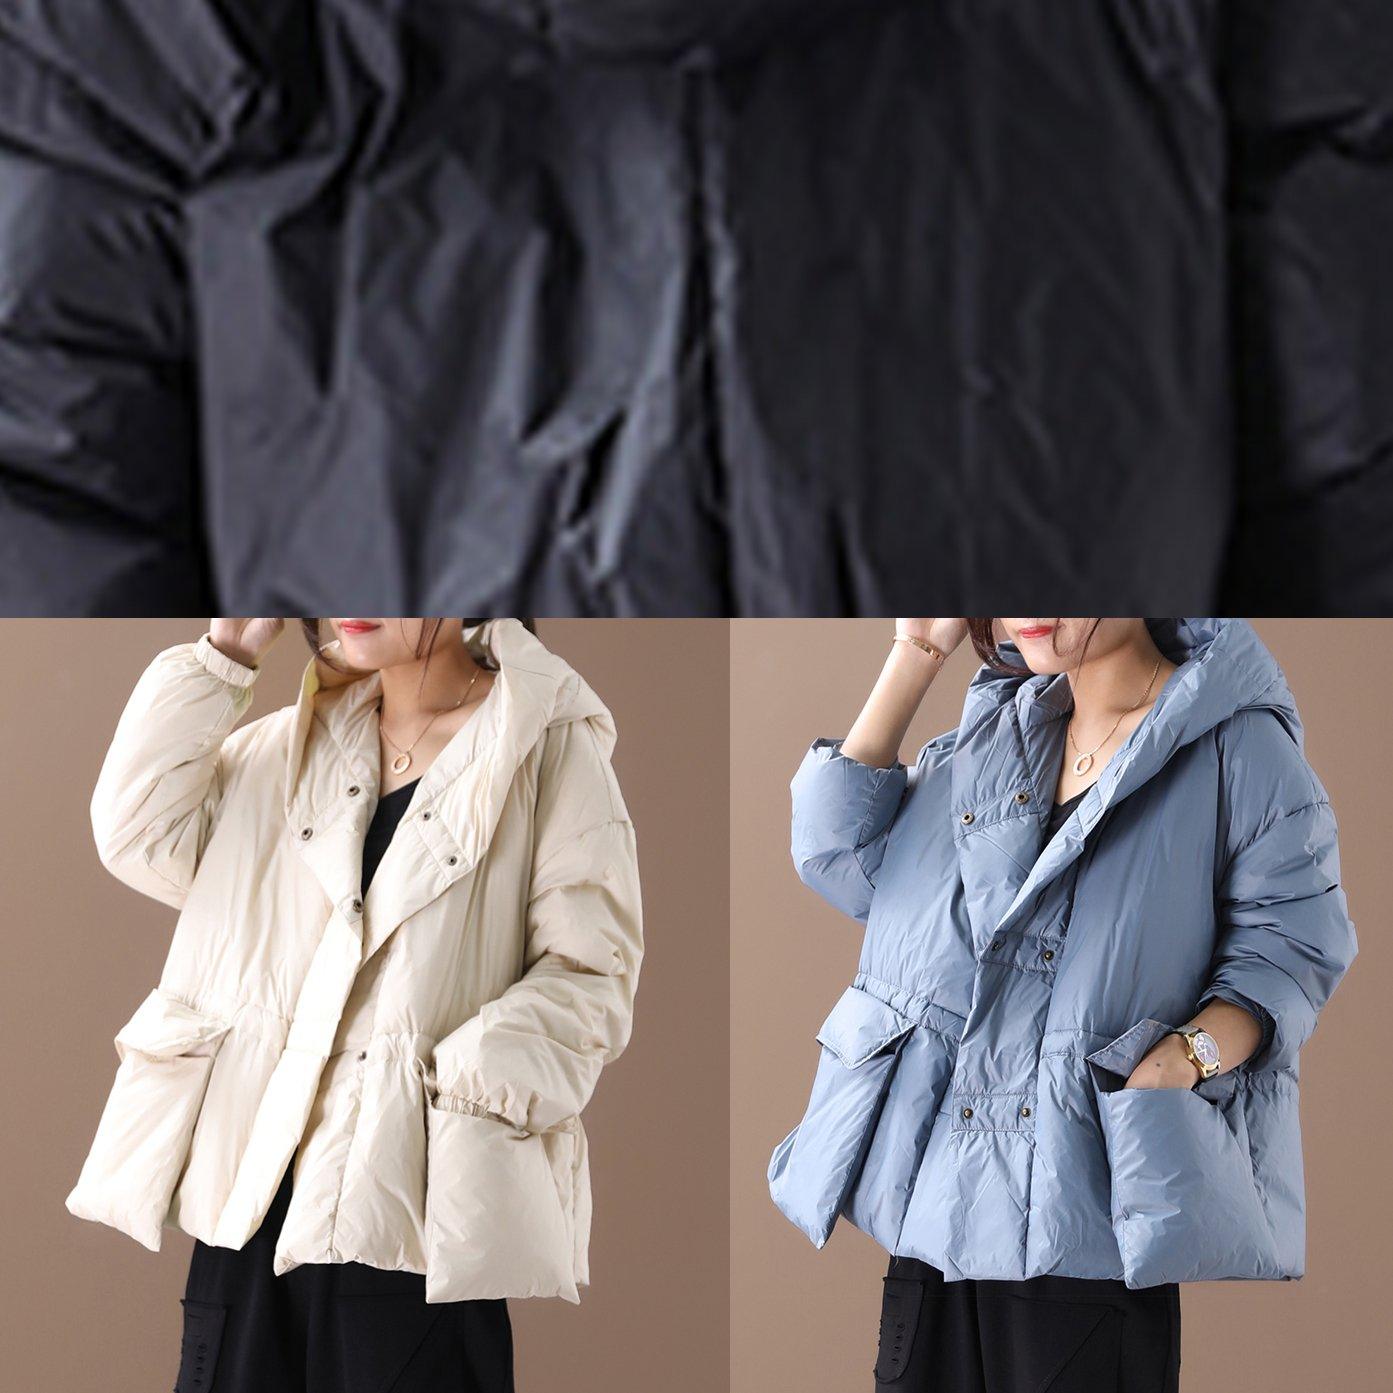 2019 blue down coat winter plus size snow jackets hooded overcoat big pockets - Omychic